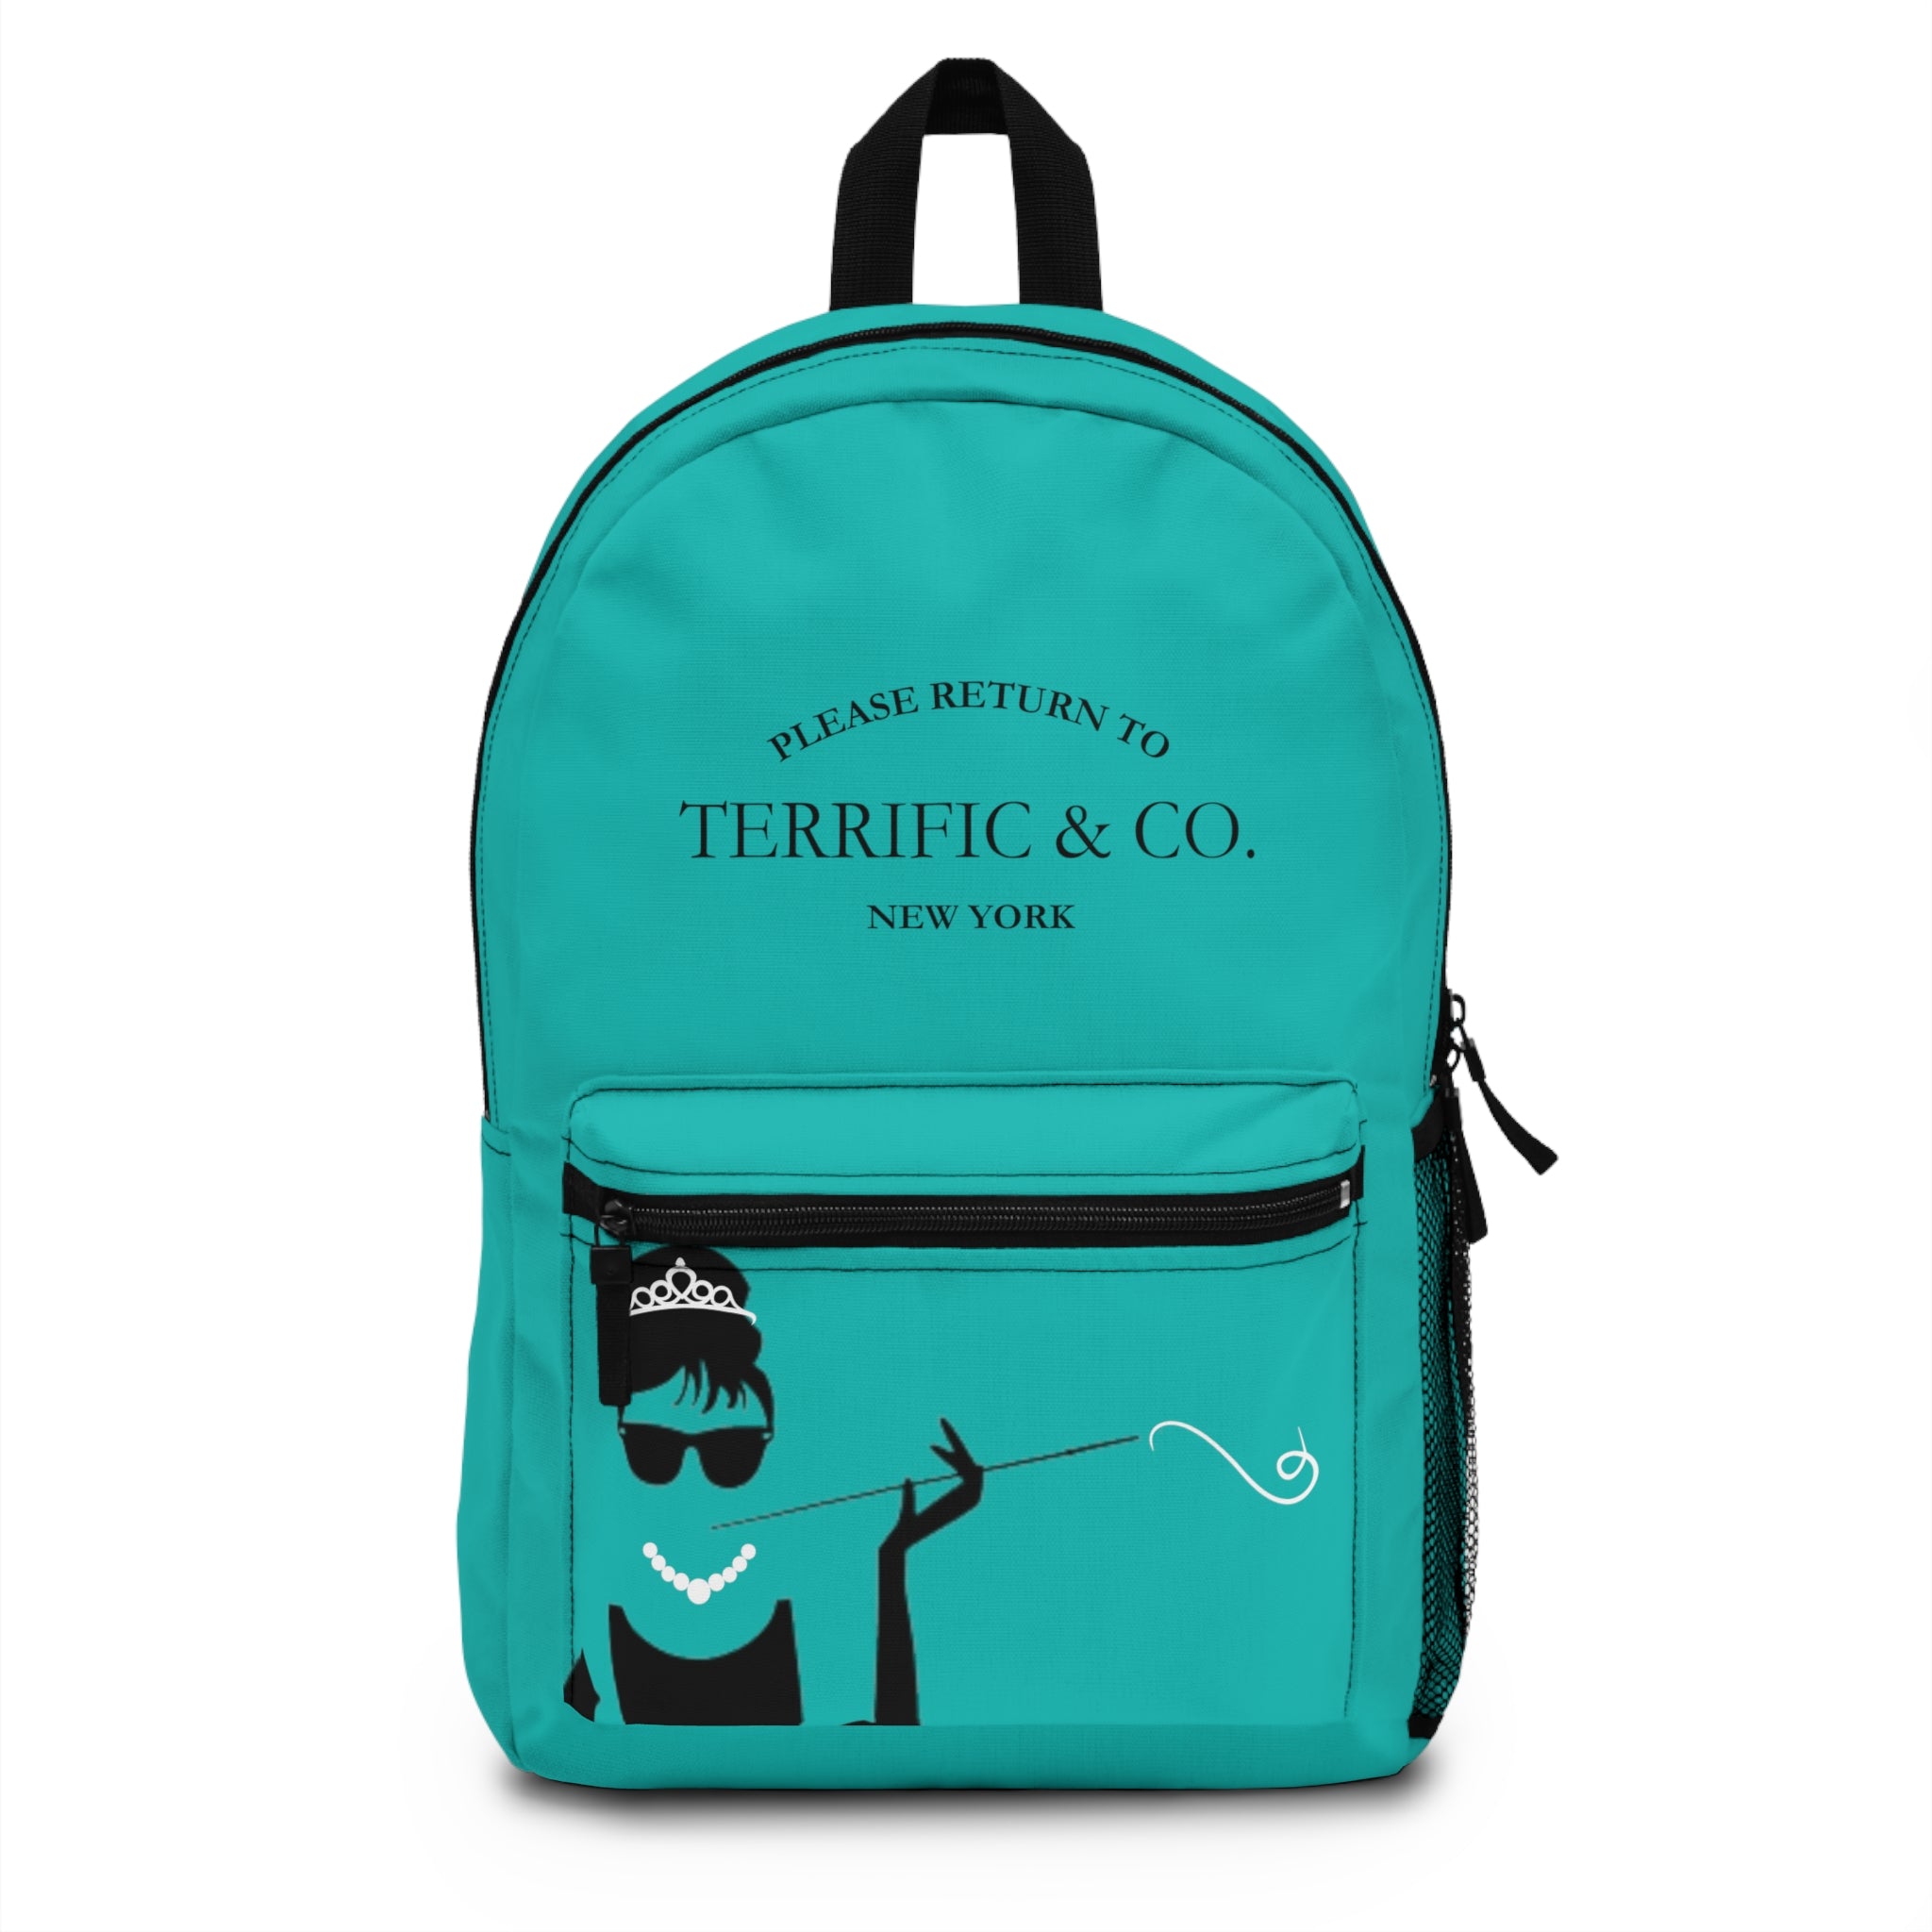 Terrific and Co. (Silhouette) Backpack, Unisex Plaid Backpack Bags One-size The Middle Aged Groove